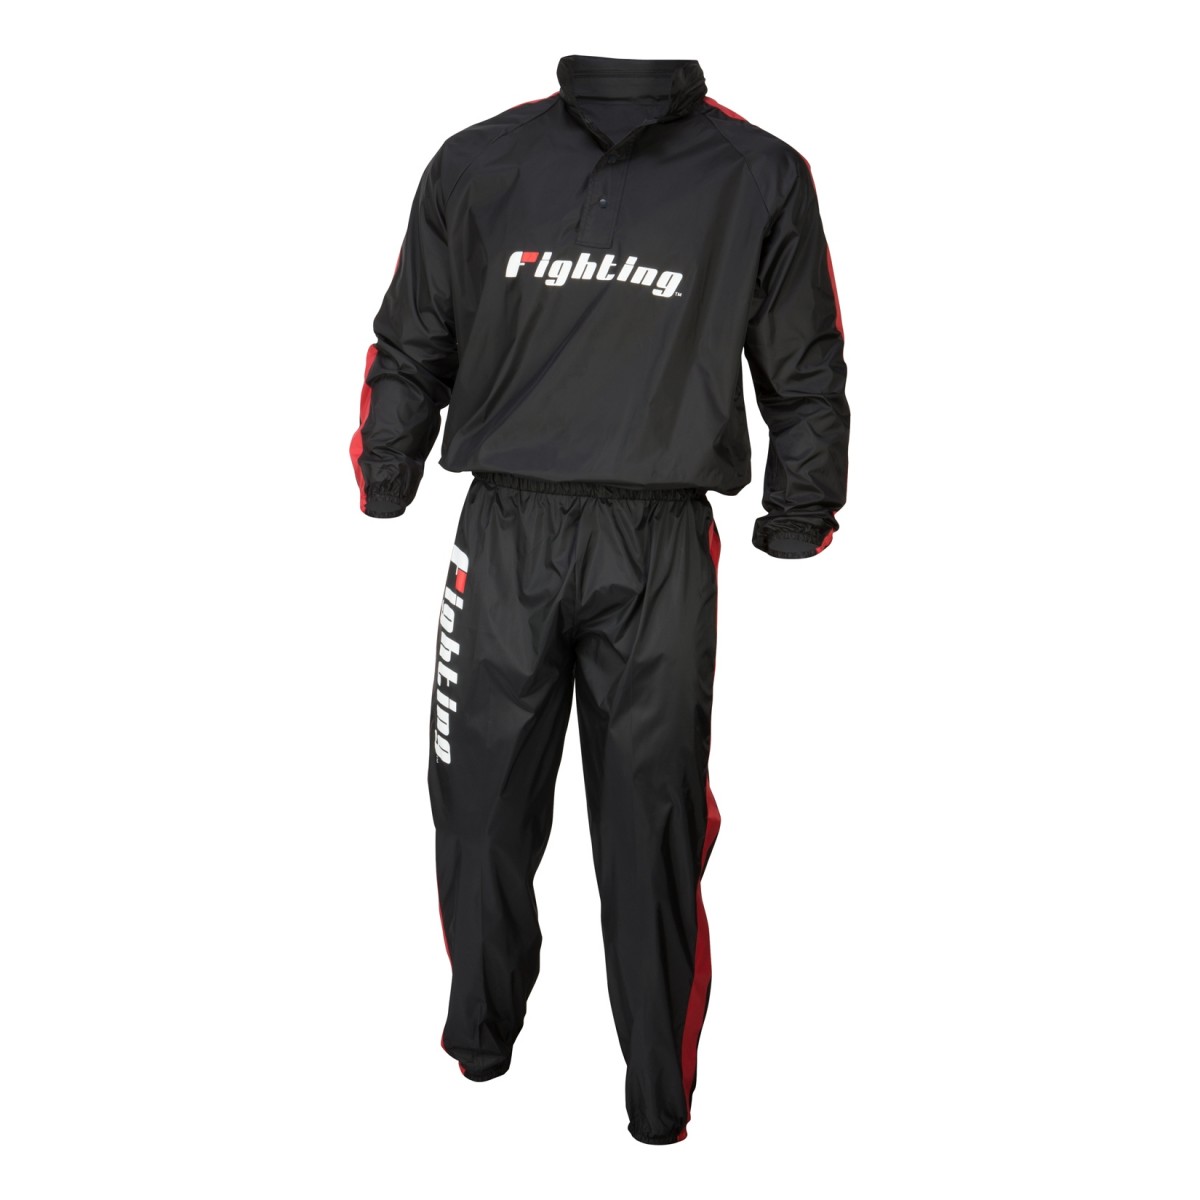 Fighting Sports Renew Hooded Sauna Suit - Black/Red